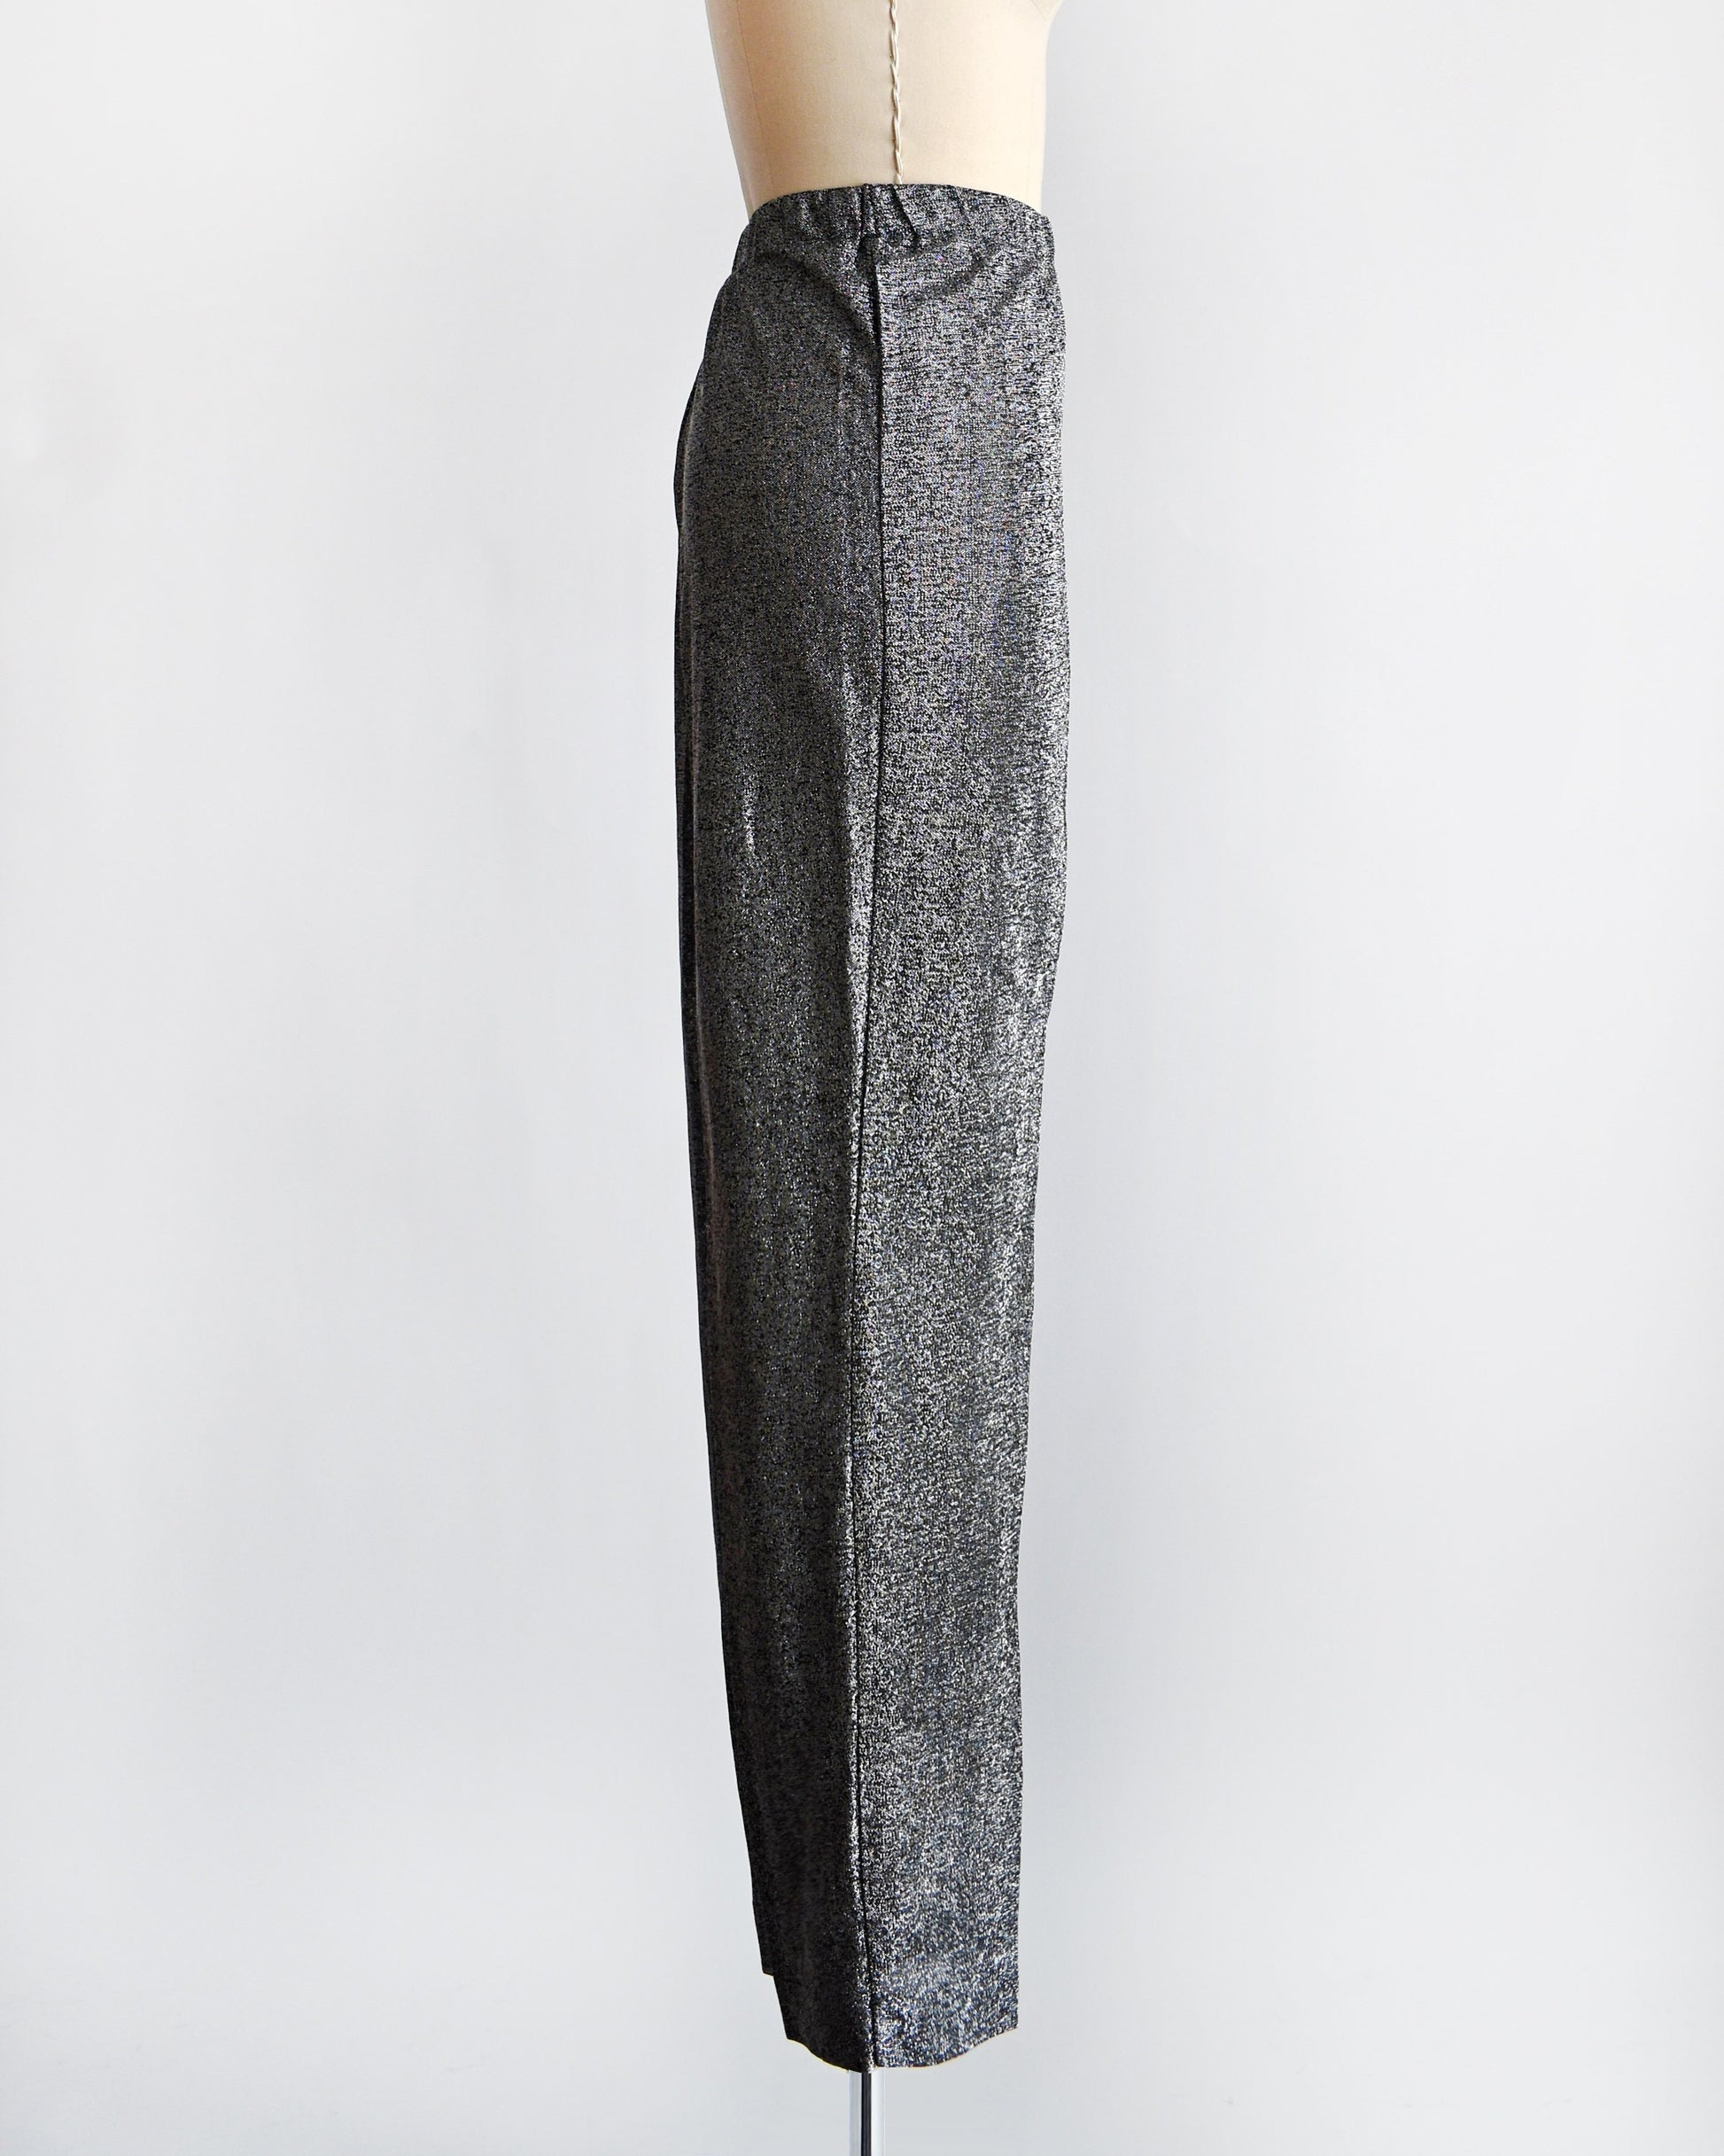 Side view of a vintage pair of 70s silver and black metallic pants on a dress form.